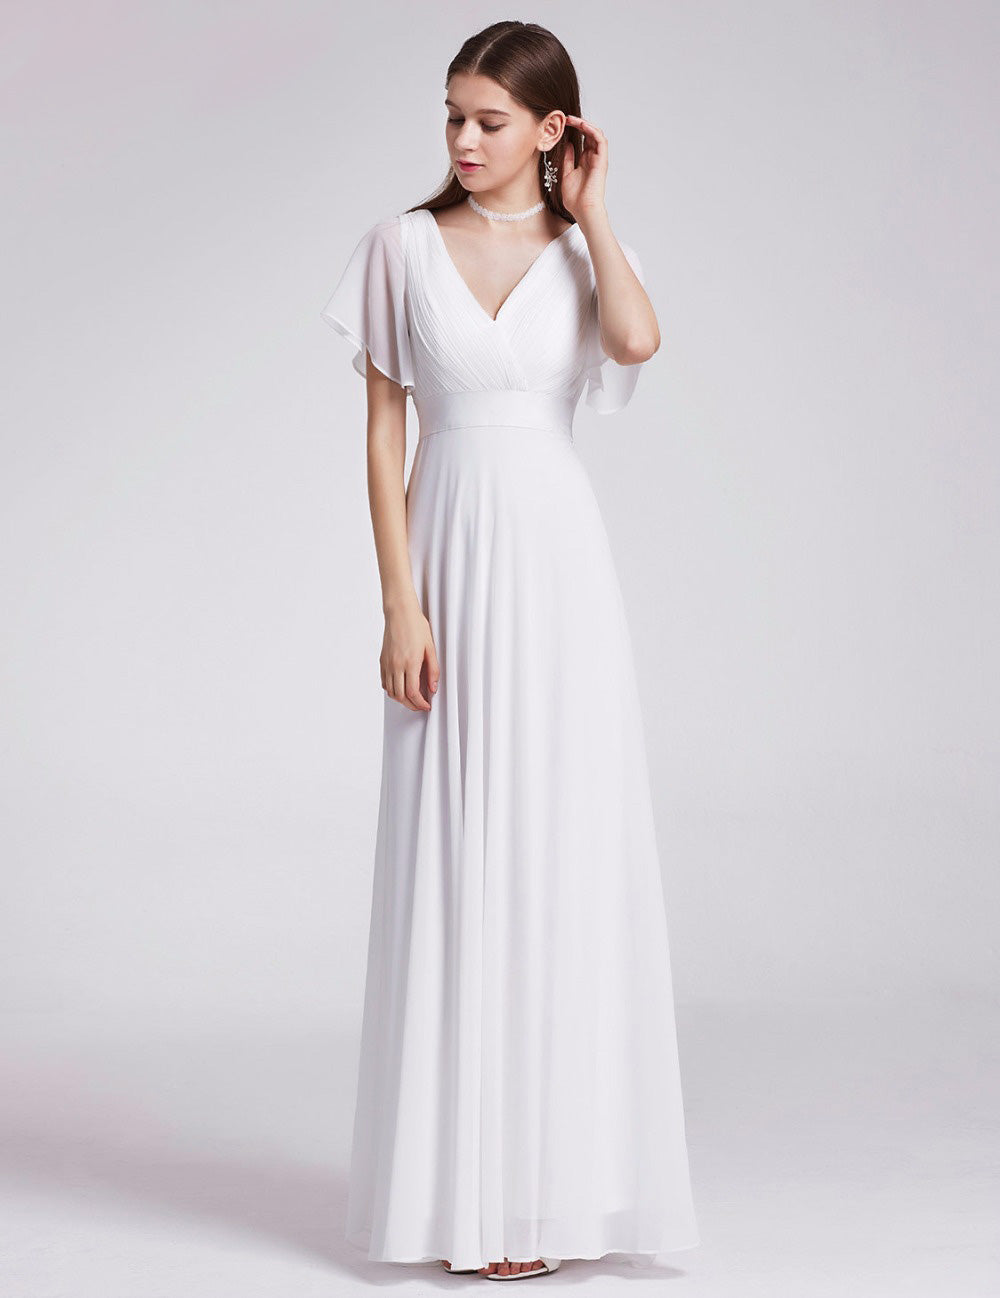 The Theodora :: Vintage Chiffon Short Bell Sleeve Wedding Dress :: Available Up to Size 26 W